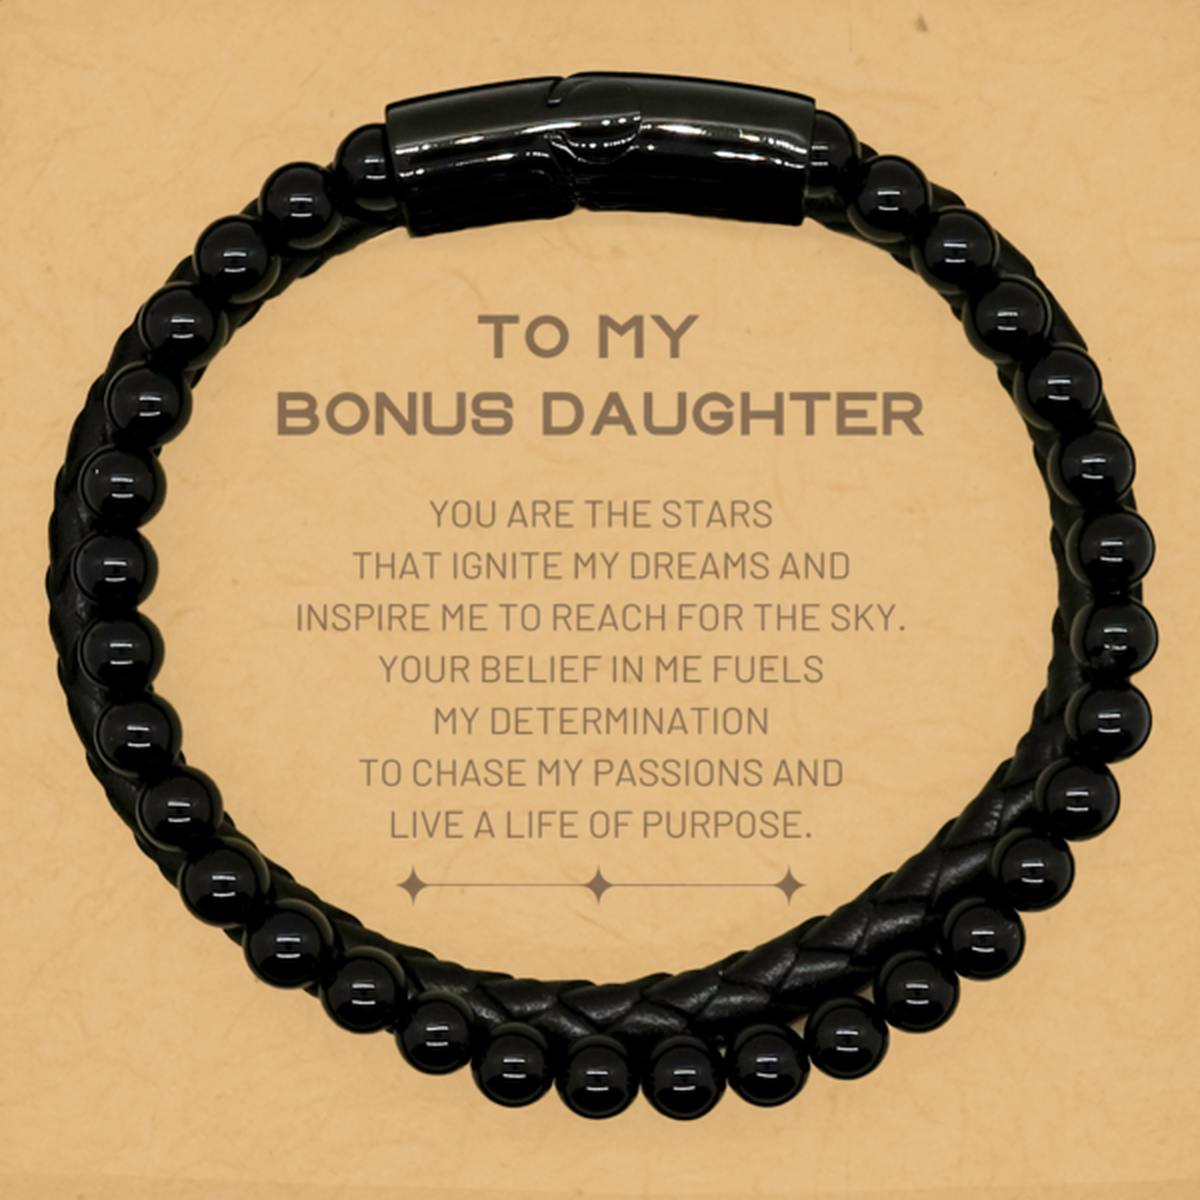 To My Bonus Daughter Stone Leather Bracelets, You are the stars that ignite my dreams and inspire me to reach for the sky, Birthday Unique Gifts For Bonus Daughter, Thank You Gifts For Bonus Daughter